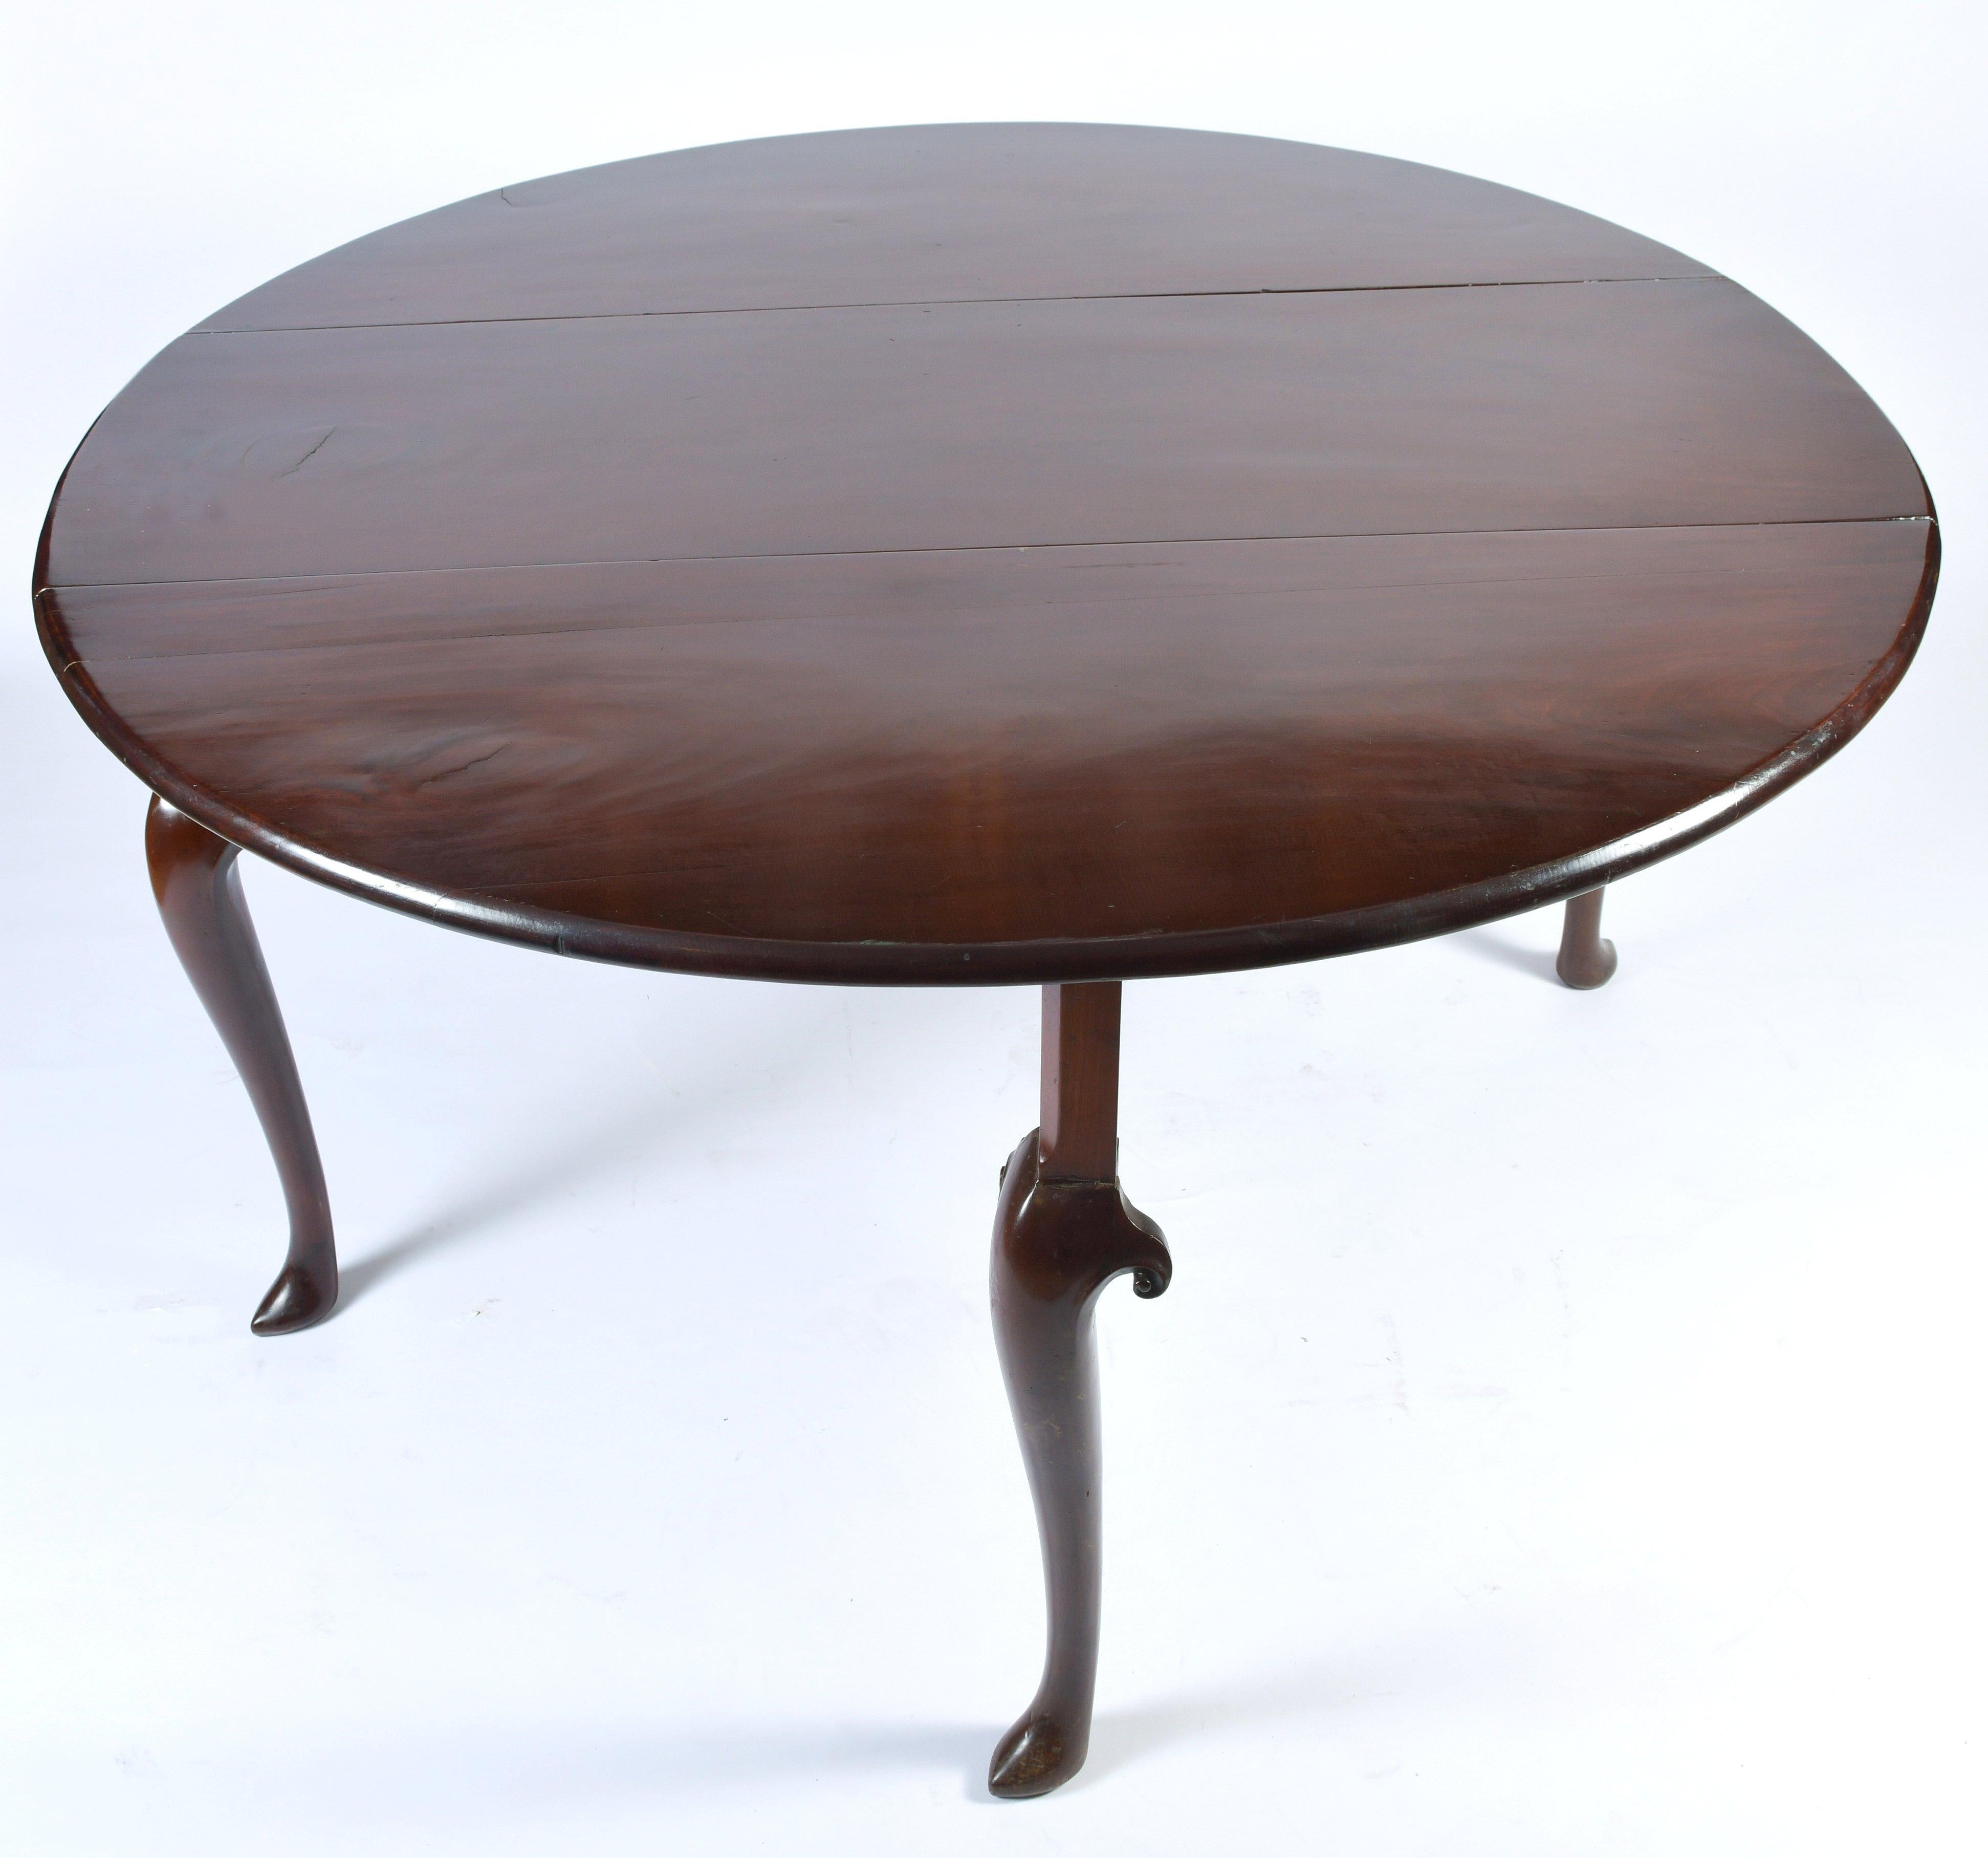 This outstanding and beautiful late 18th century mahogany drop leaf circular table features a gorgeous rich deep patinated grain and supported on cabriole legs with hoof feet. The table measures 18 in – 45.7 cm wide with both sides down and 56 in –